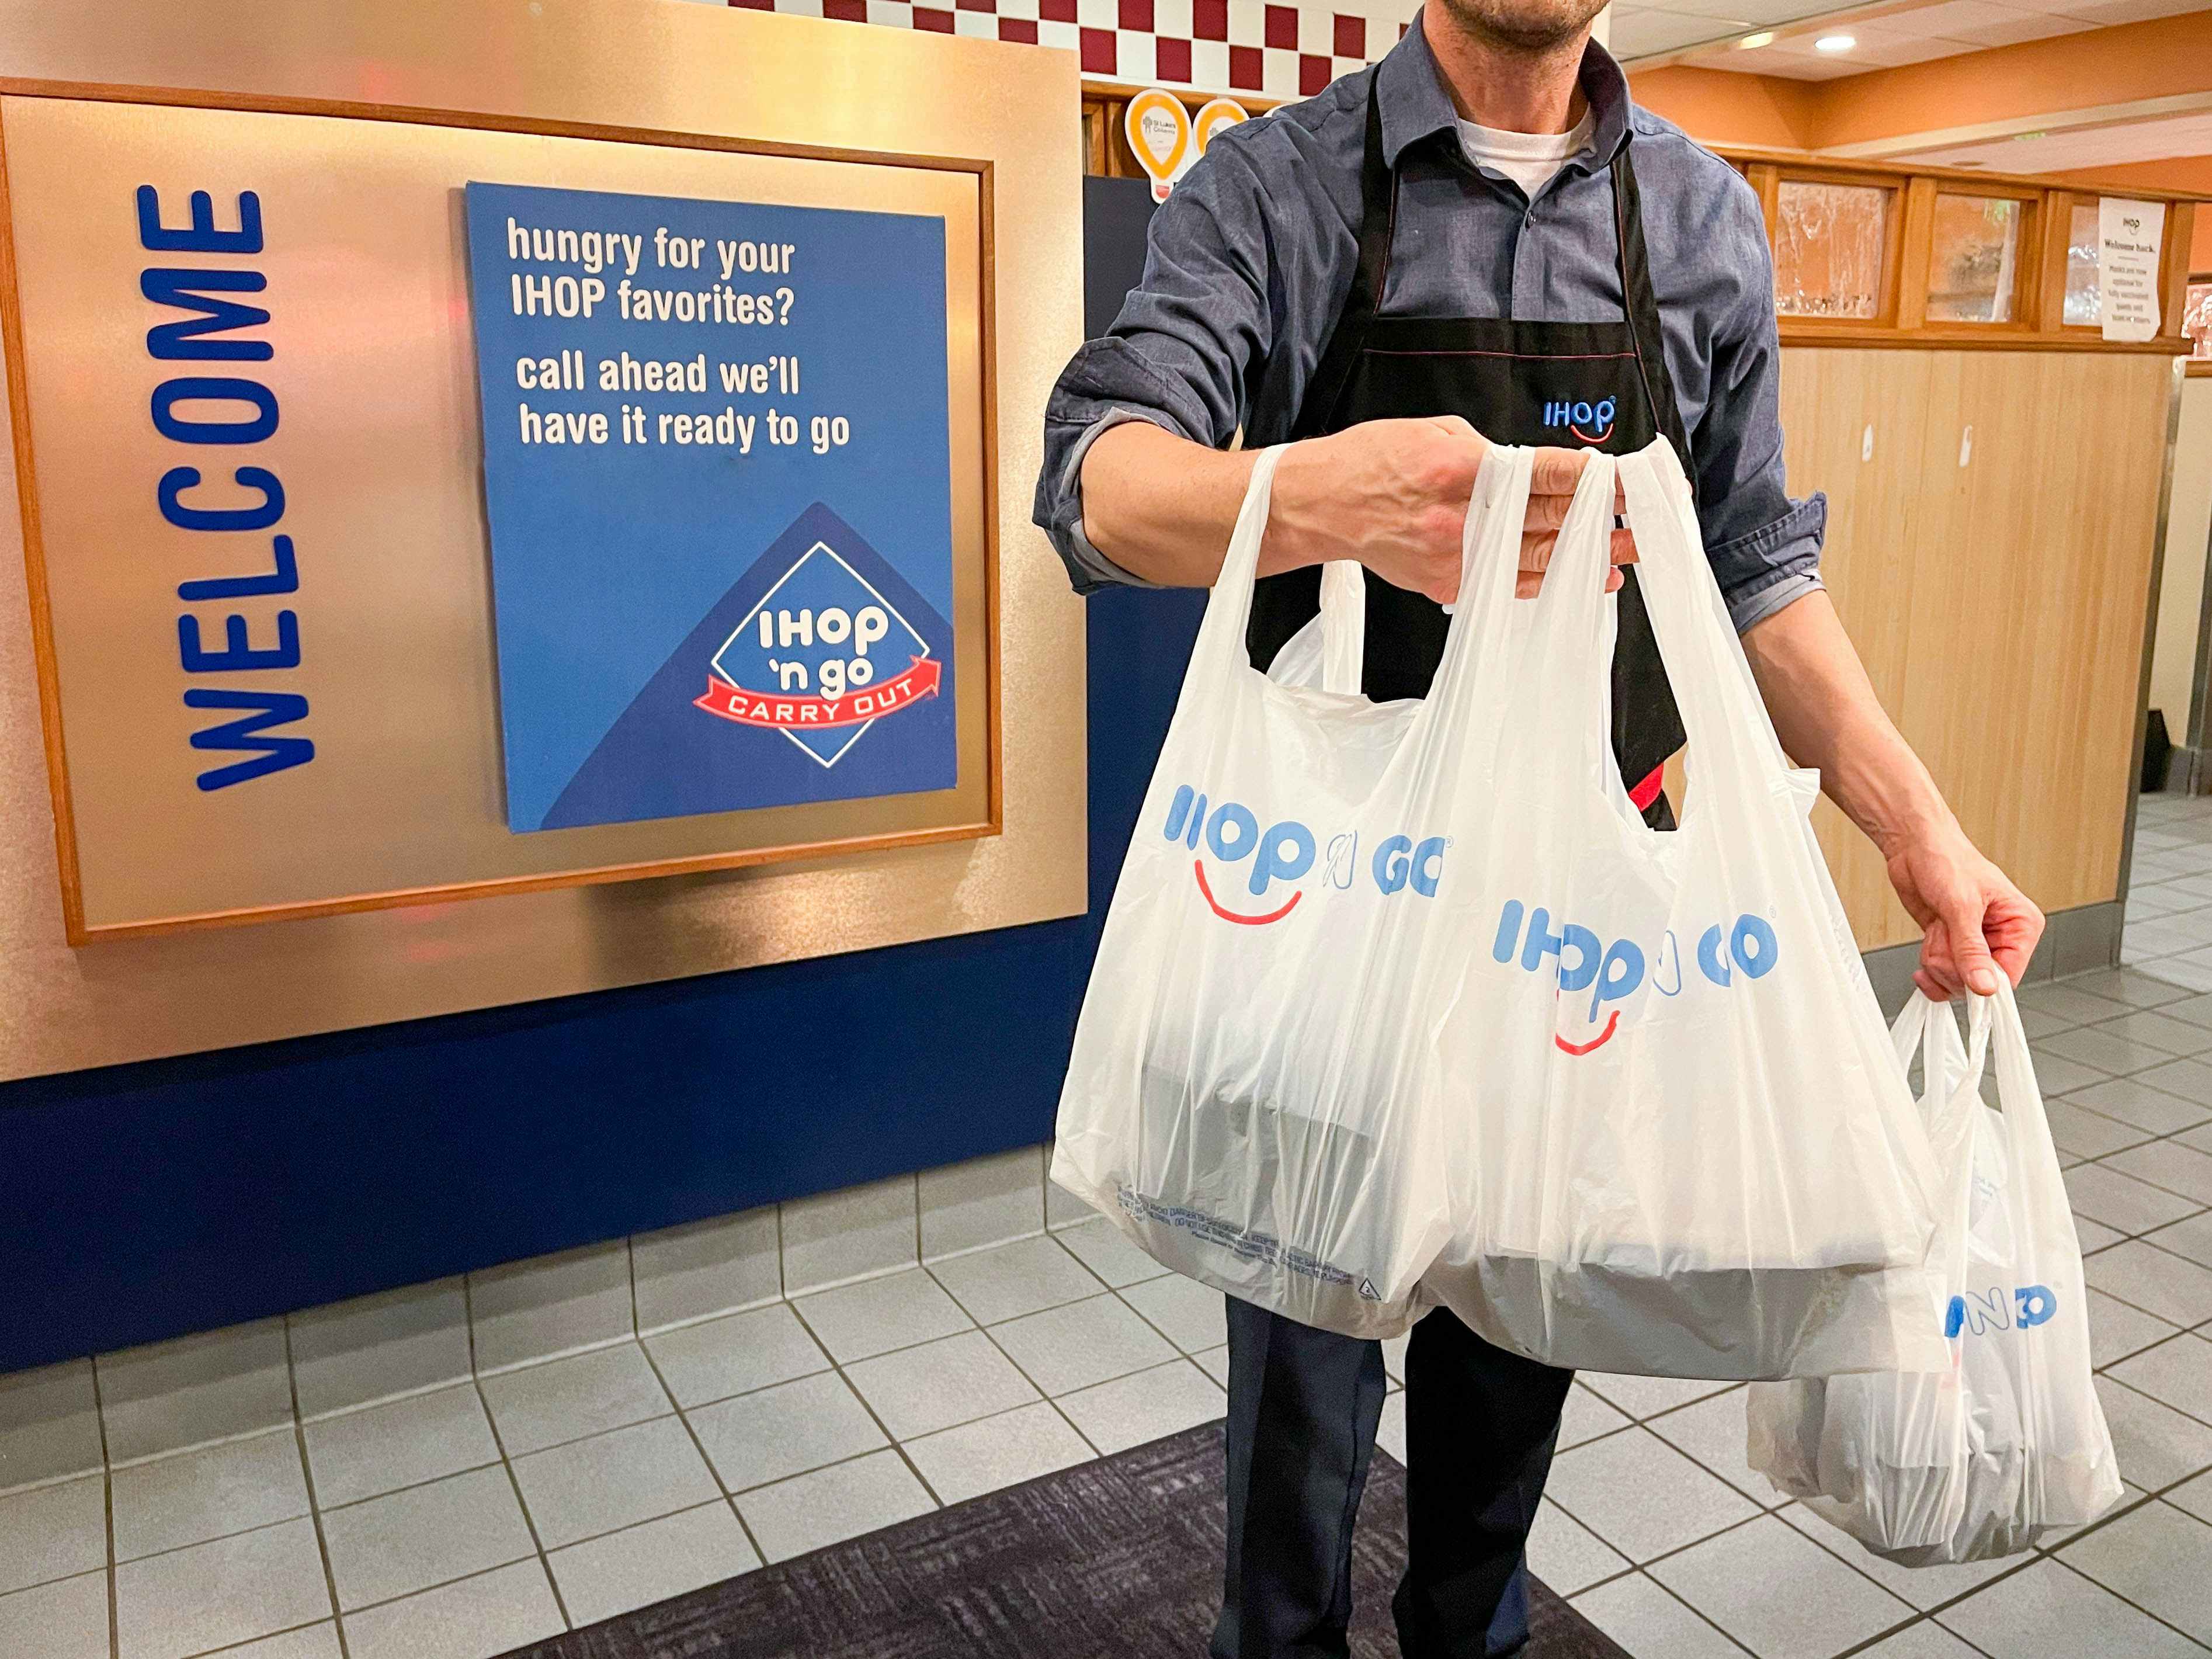 ihop to go being held by employee